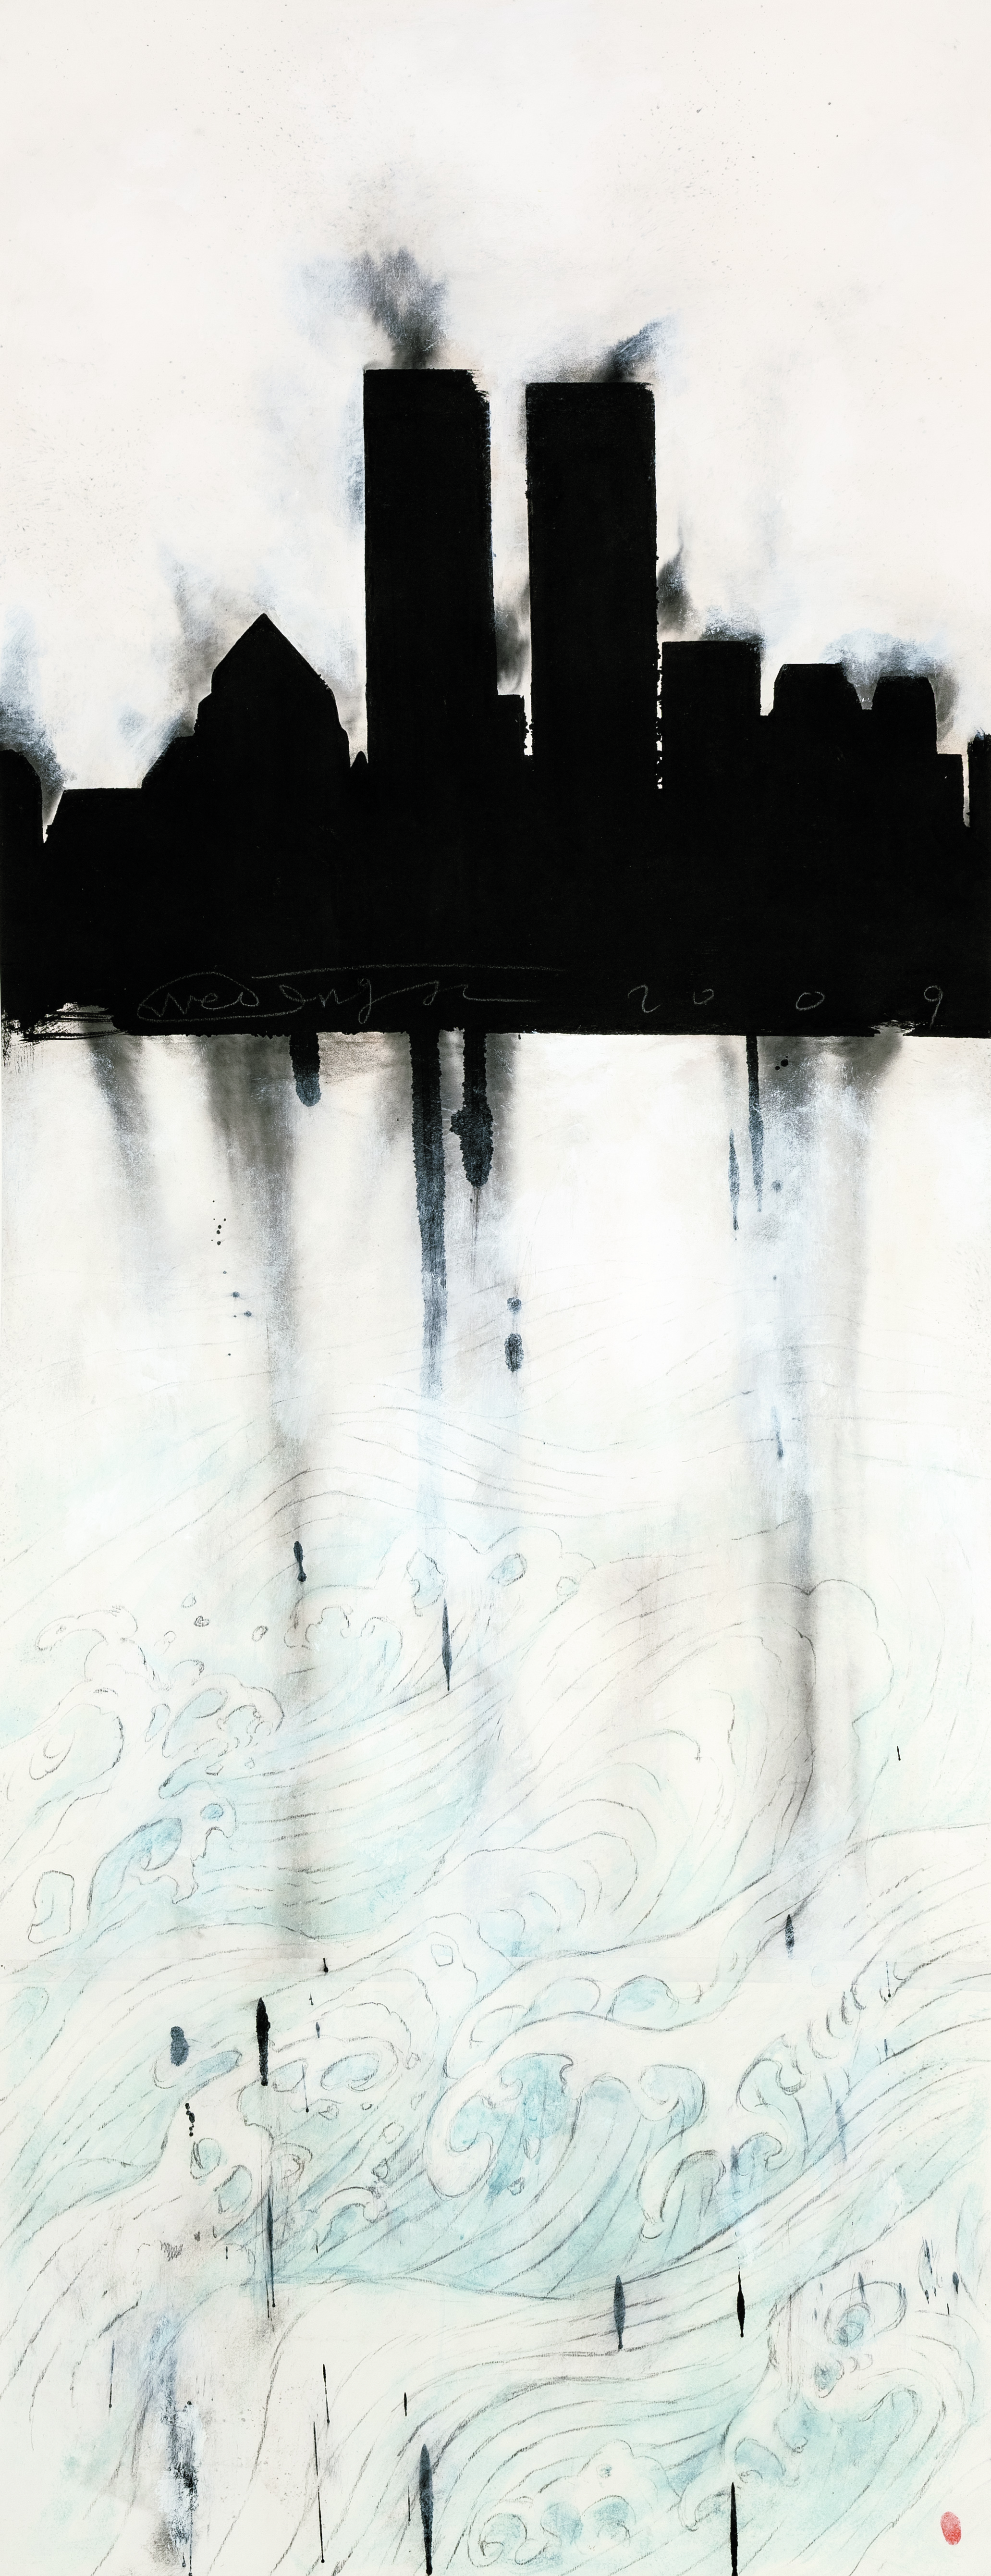 Wei Qingji   Mirage-Twin towers   2009   Ink and mixed media on rice paper   180x70cm